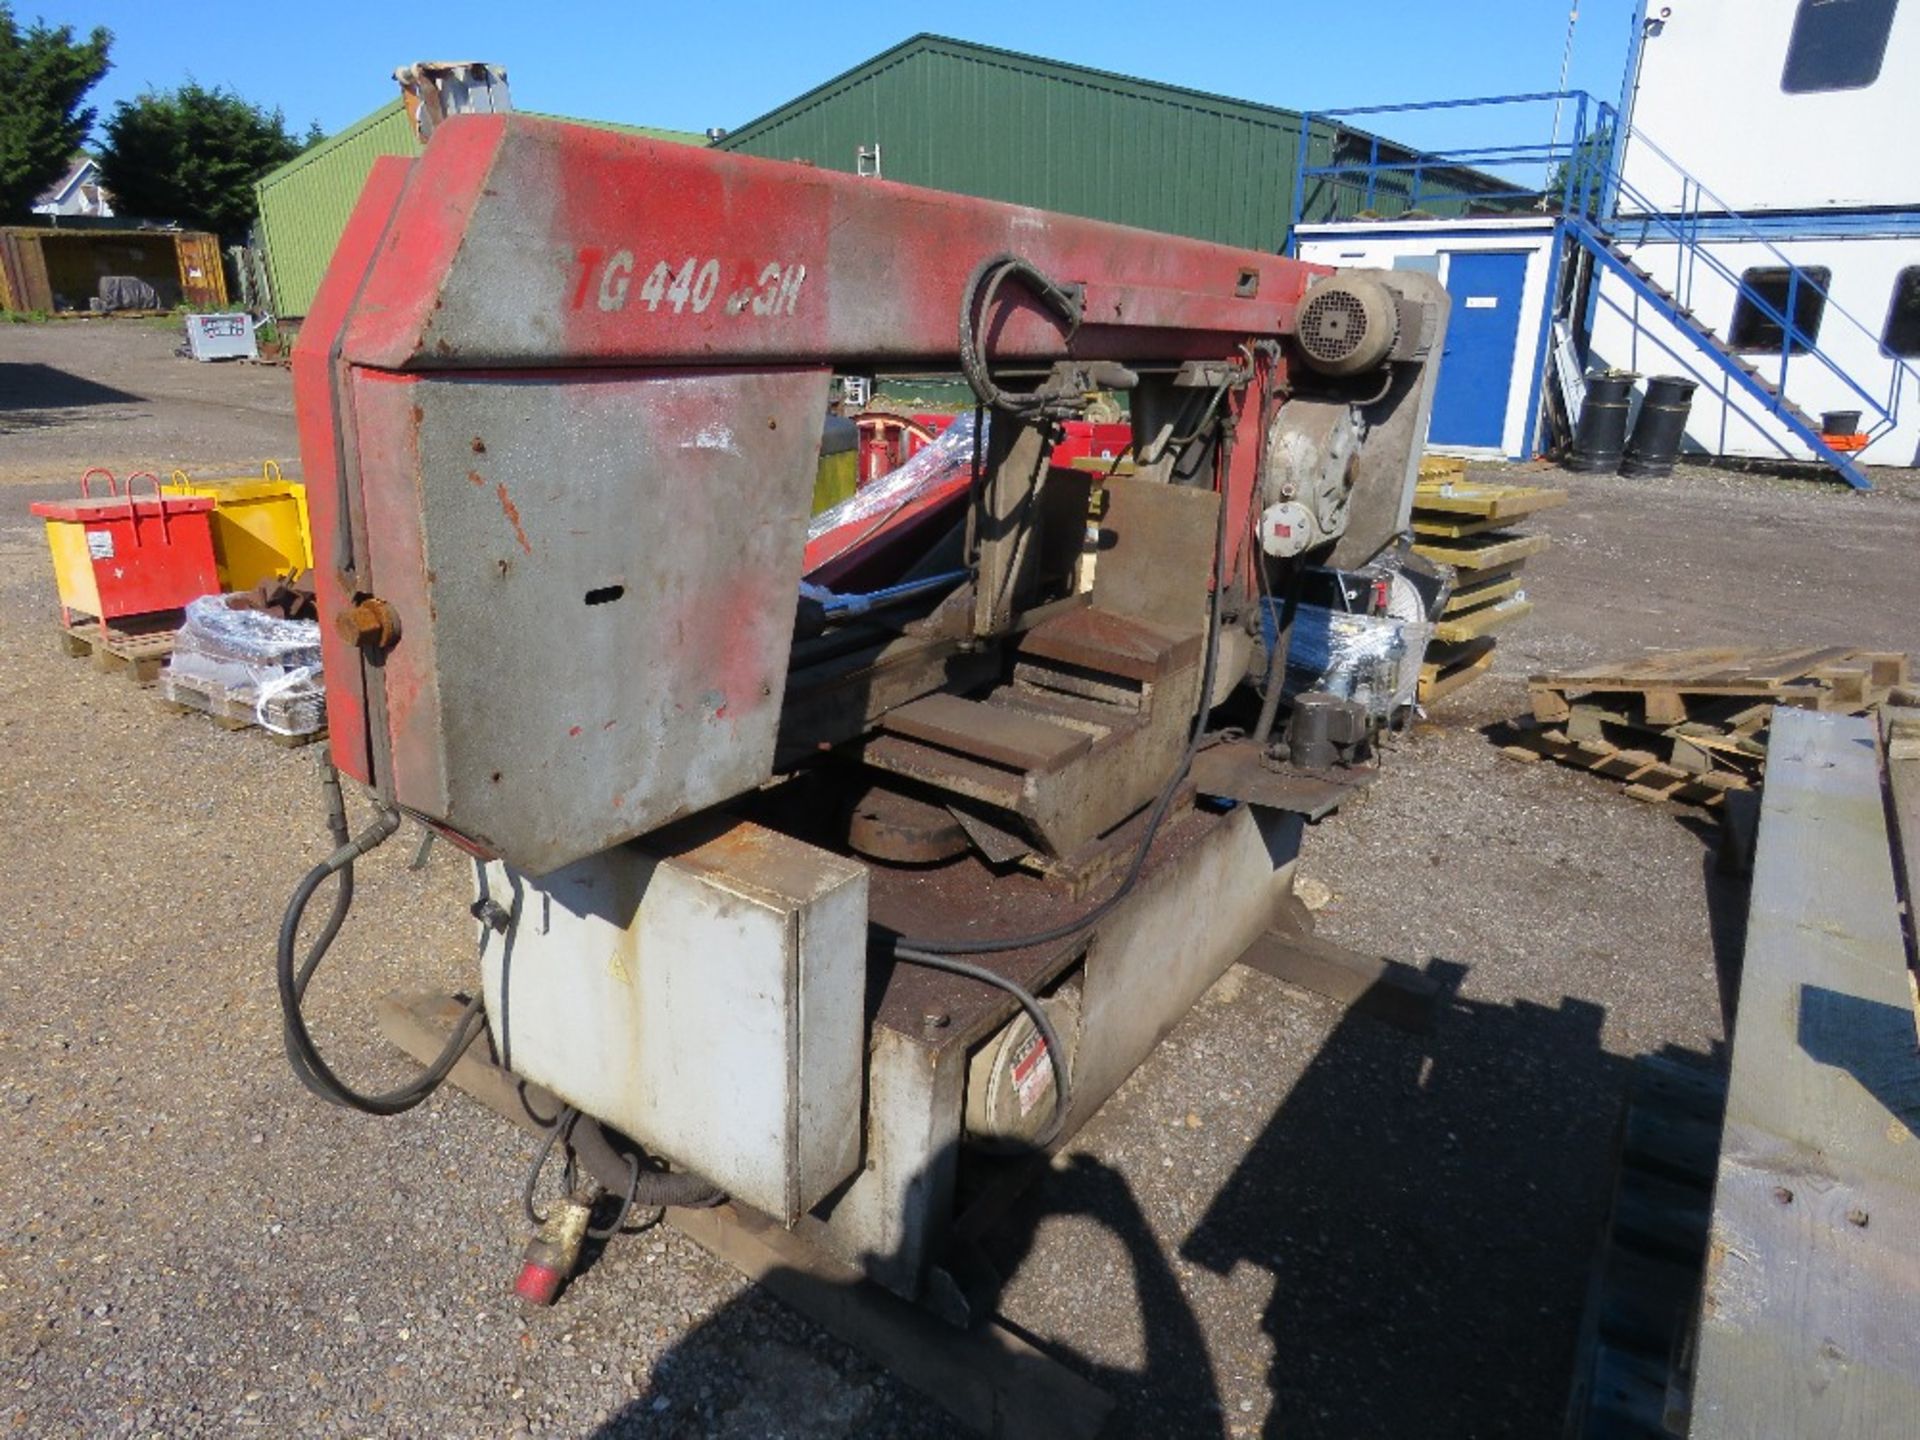 LARGE SIZED WORKSHOP BANDSAW G440DGH MODEL. WORKING WHEN REMOVED, SOURCED FROM COMPANY LIQUIDATION. - Image 3 of 9